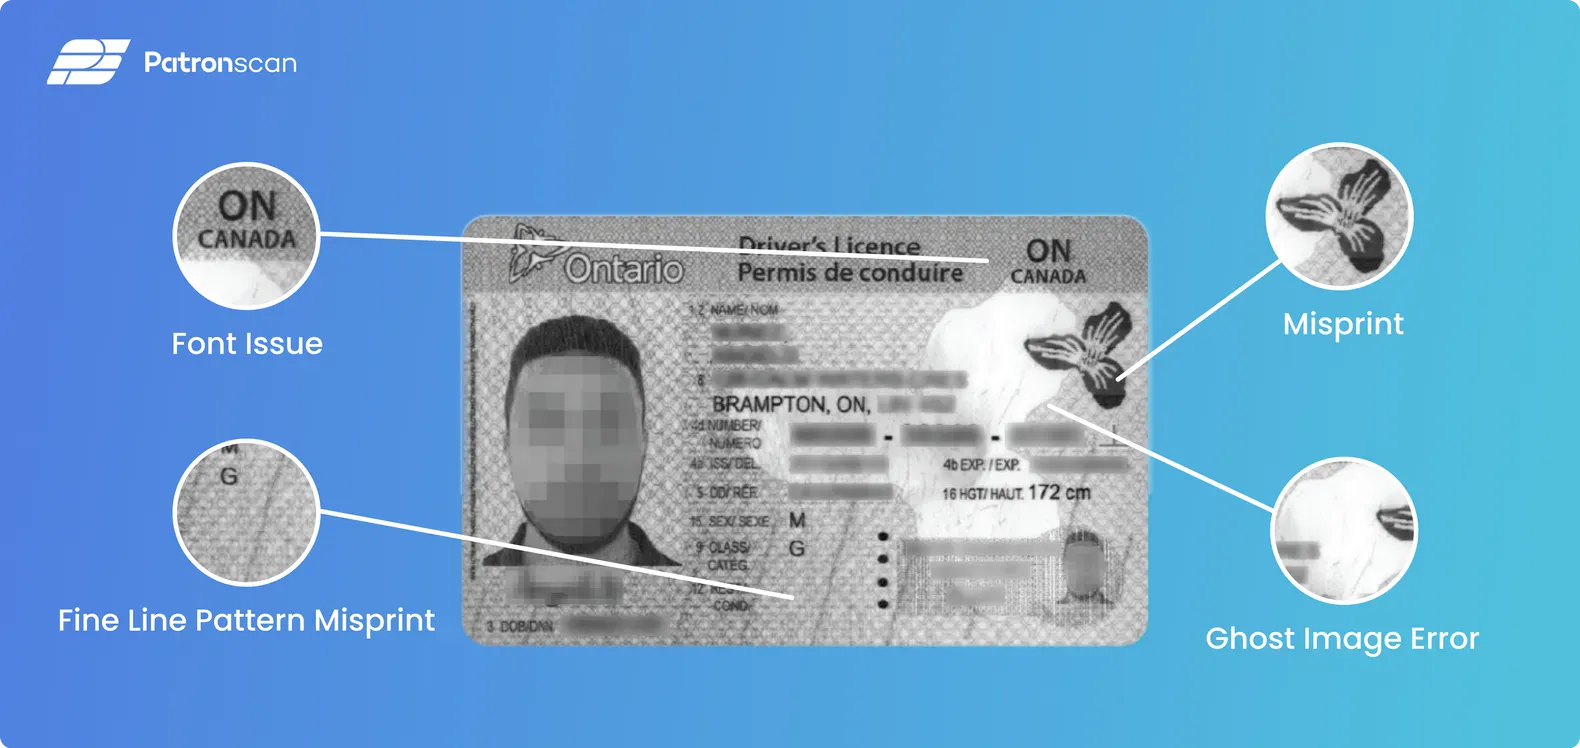 how to know if your fake id is good